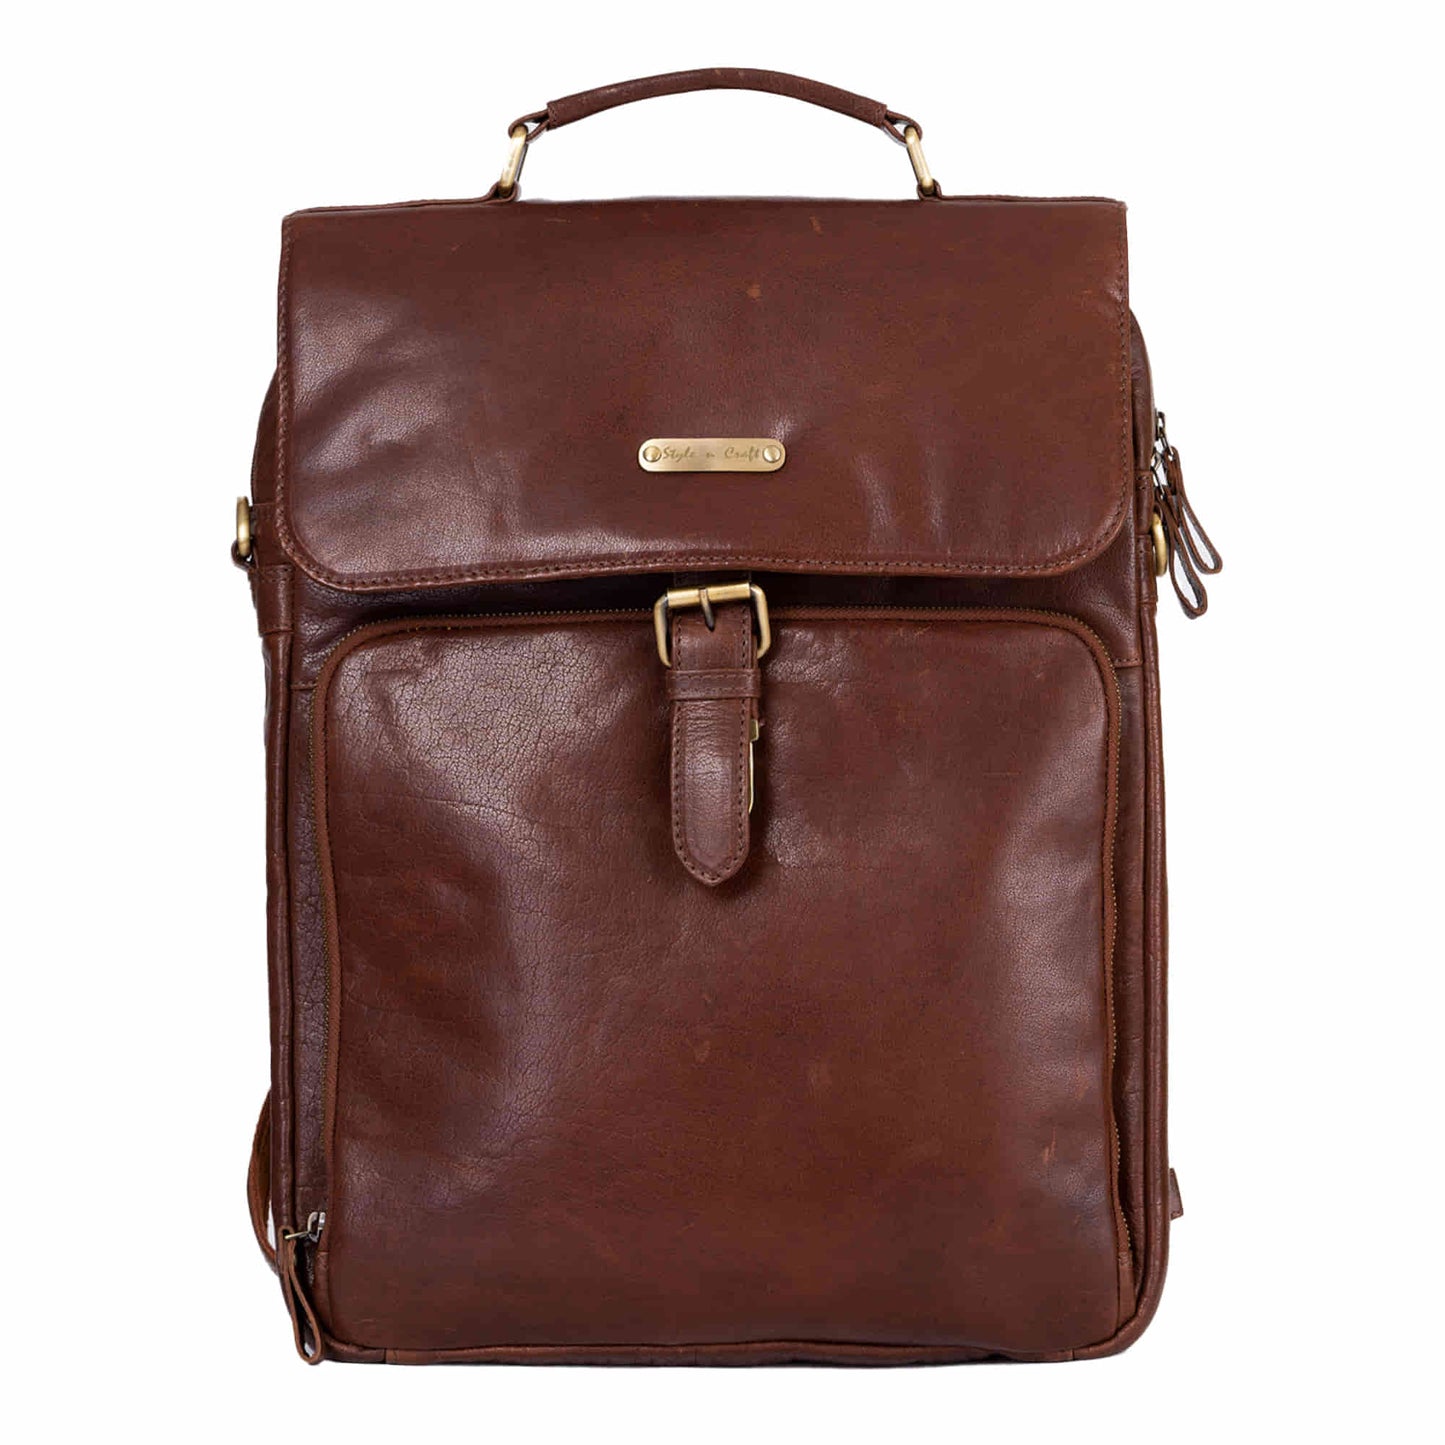 Style n Craft 392600 Cross Body Messenger Bag & Backpack in Full Grain Dark Brown Vintage Leather - Front View showing the front flap with the fixed leather handle on top